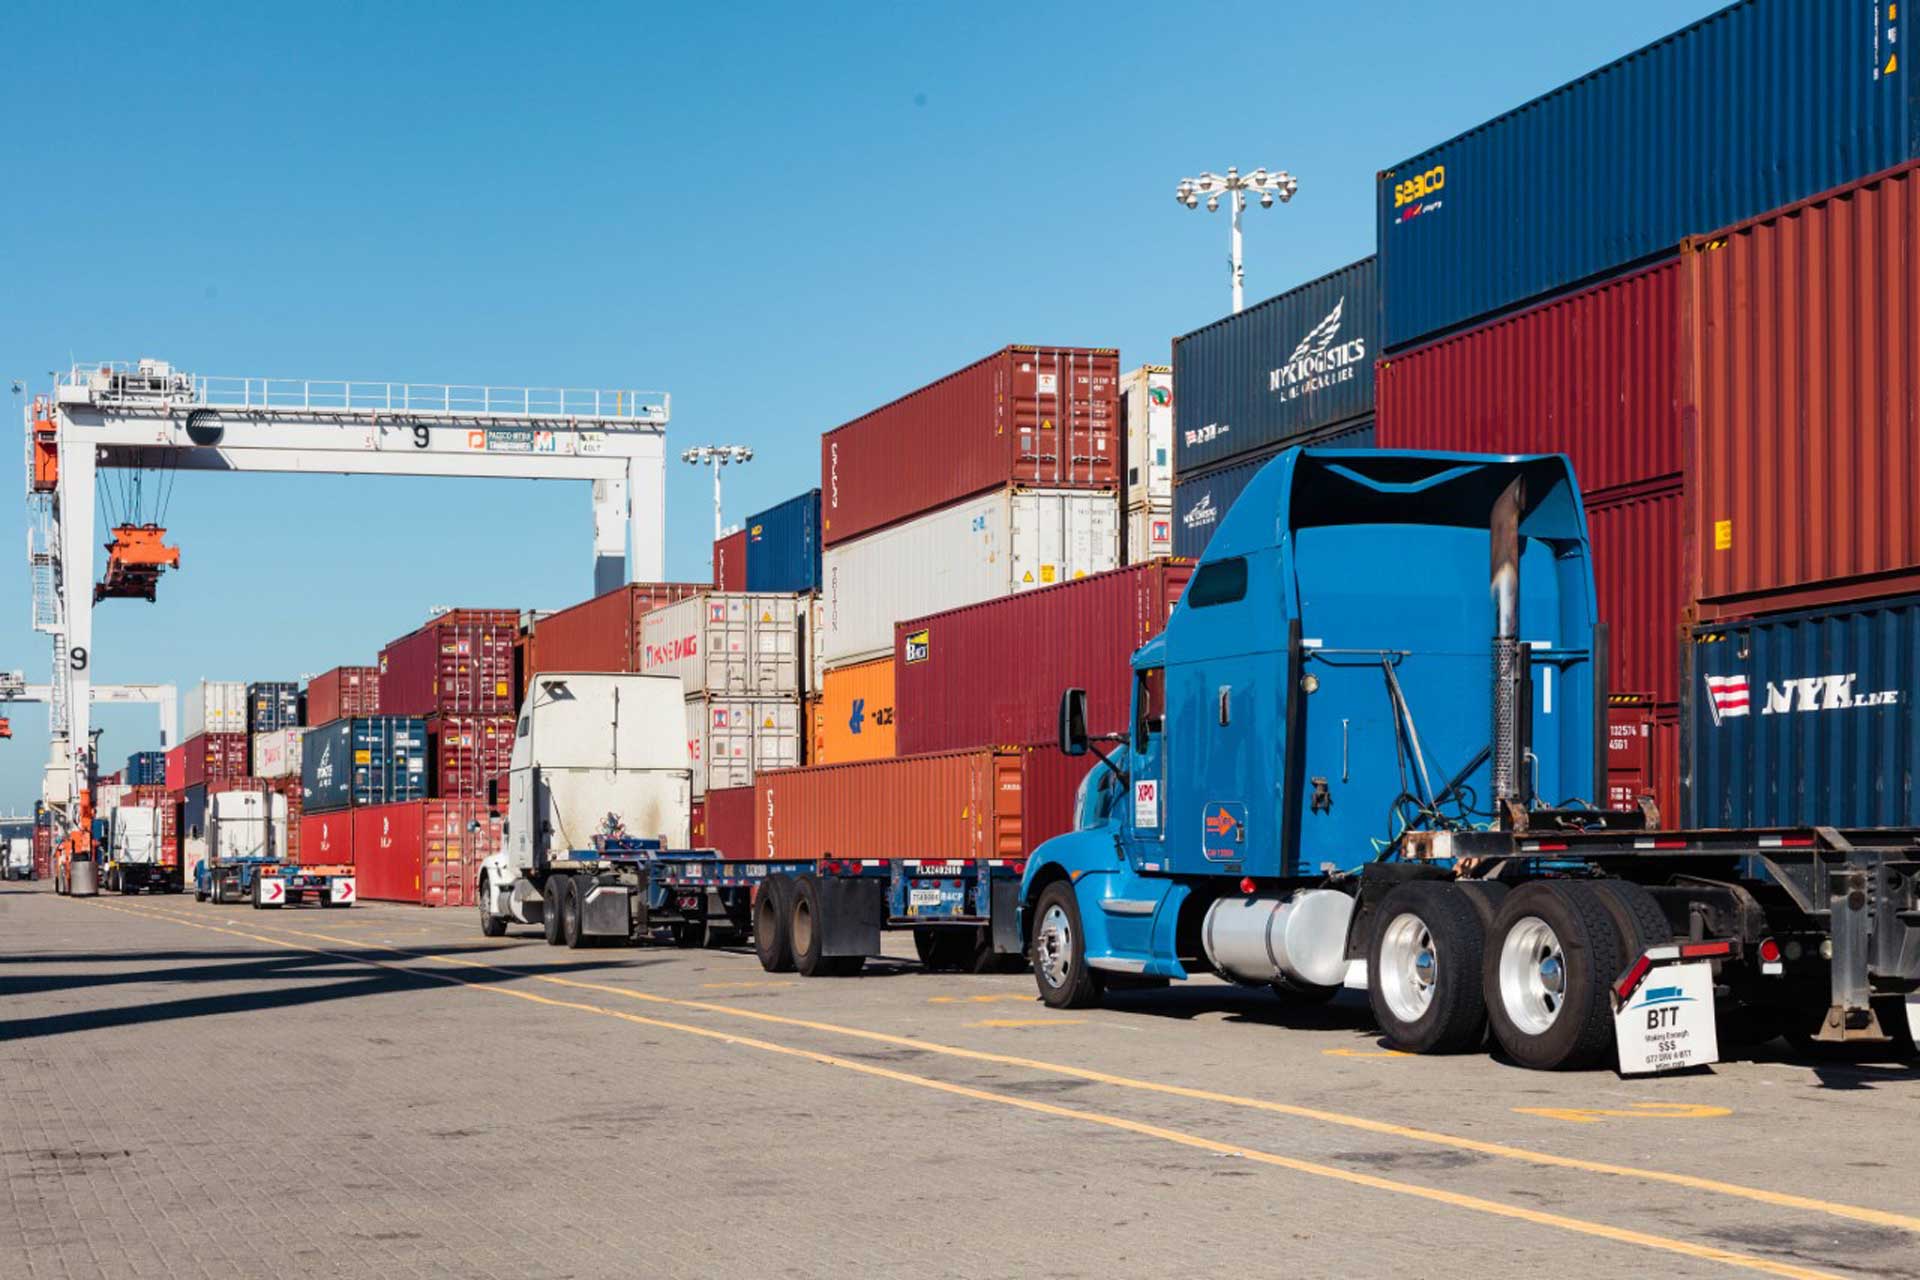 2-2-2-thumbnail_Containers-and-trucks-at-Port-of-Oakland-S